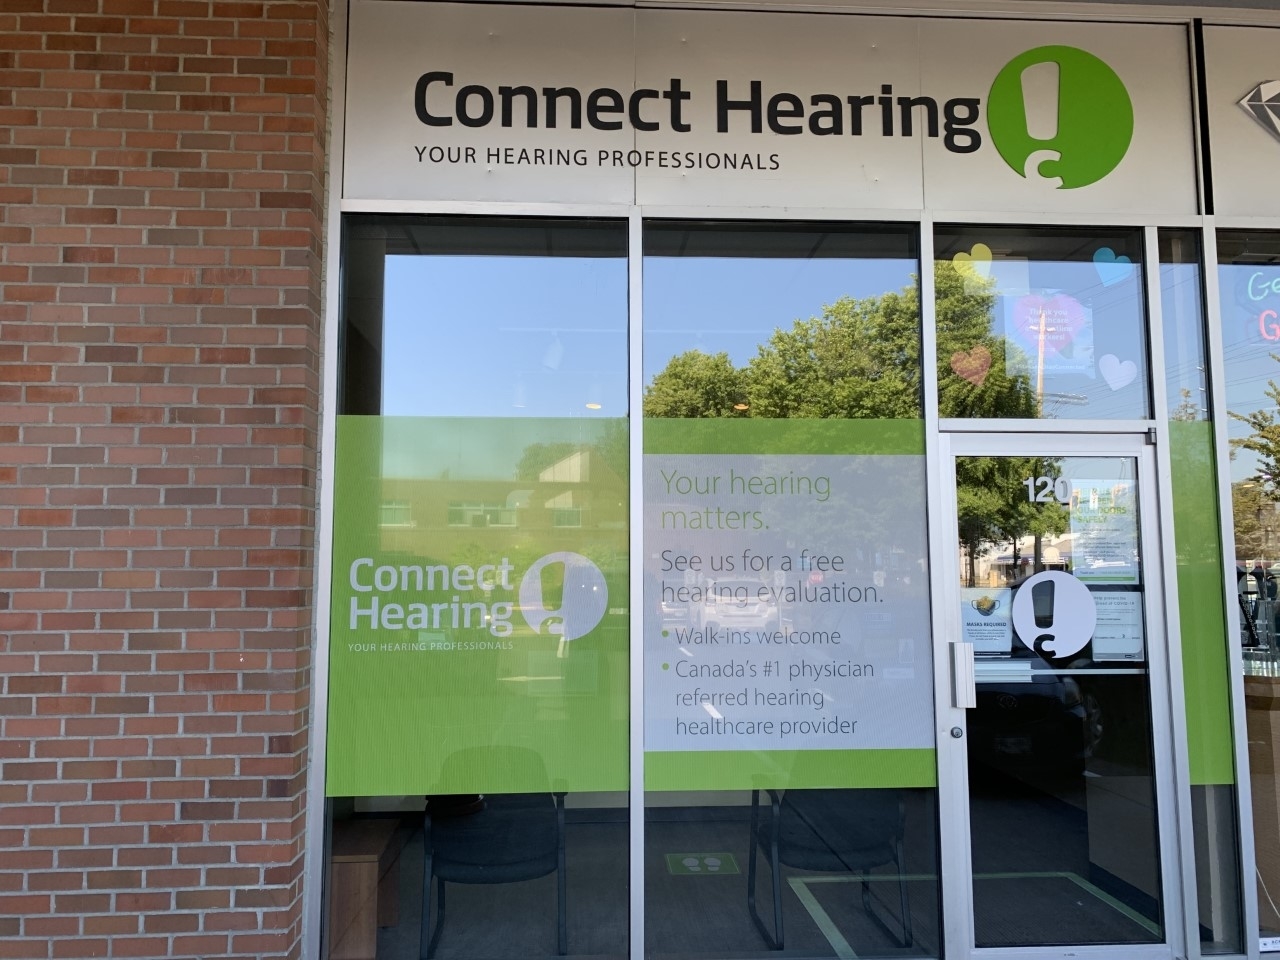 Connect Hearing - Prothèses auditives